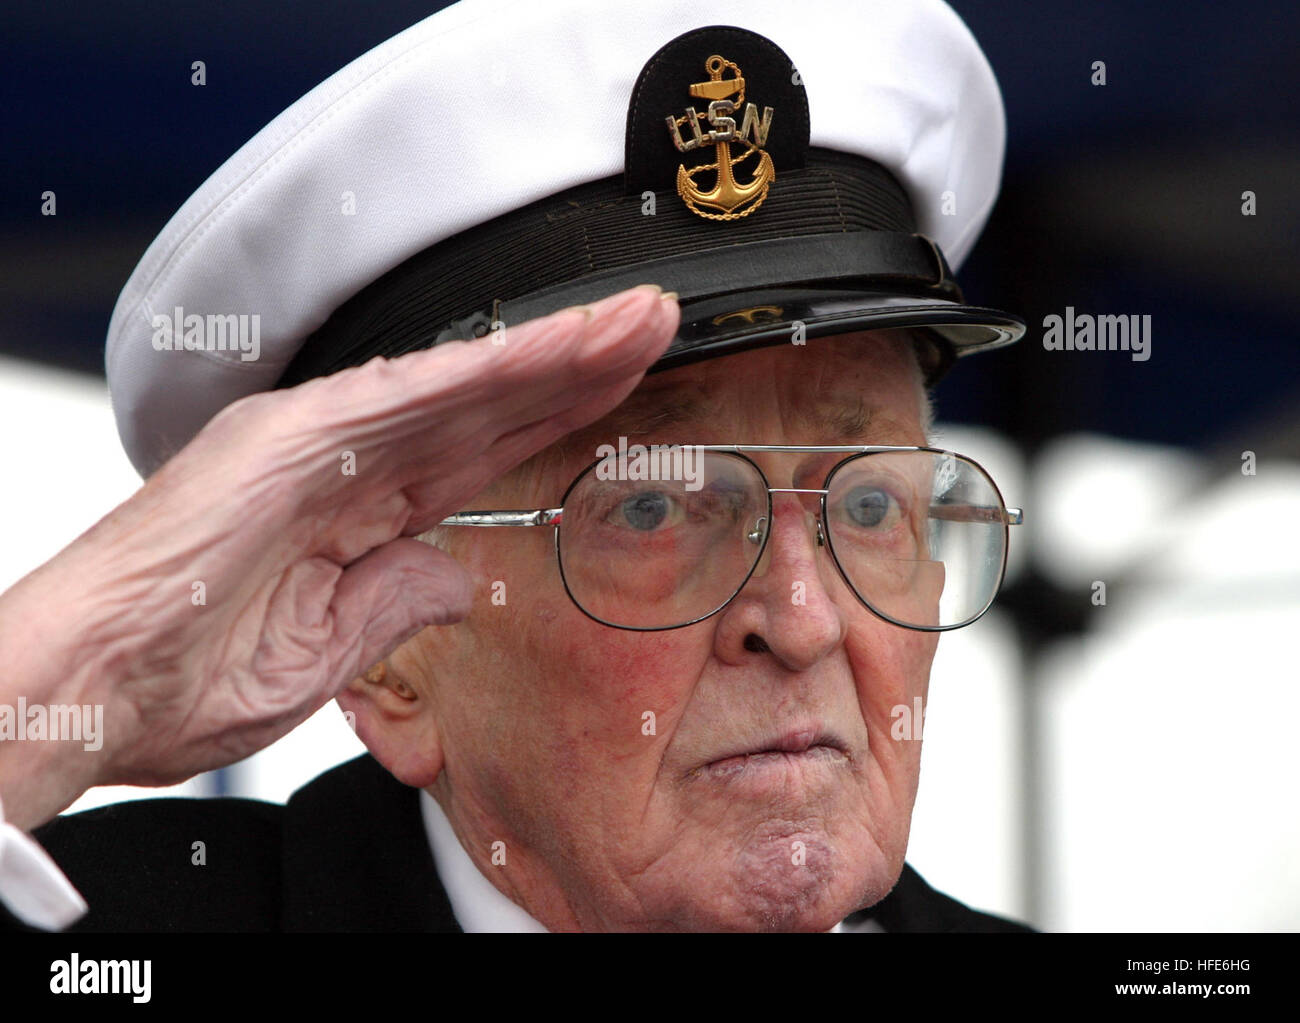 041207-N-0975R-002  Naval Station Everett, Wash. (Dec. 7, 2004) - Retired Chief Petty Officer William Brown salutes during the presentation of colors on board Naval Station Everett, Wash., during the Pearl Harbor Survivors Ceremony. Brown was at Pearl Harbor during the attack on Dec. 7, 1941. This year marked the 63rd Anniversary of the attack. U.S. Navy photo by Journalist 1st Class Ralph Radford (RELEASED) US Navy 041207-N-0975R-002 Retired Chief Petty Officer William Brown salutes during the presentation of colors on board Naval Station Everett, Wash., during the Pearl Harbor Survivors Cere Stock Photo